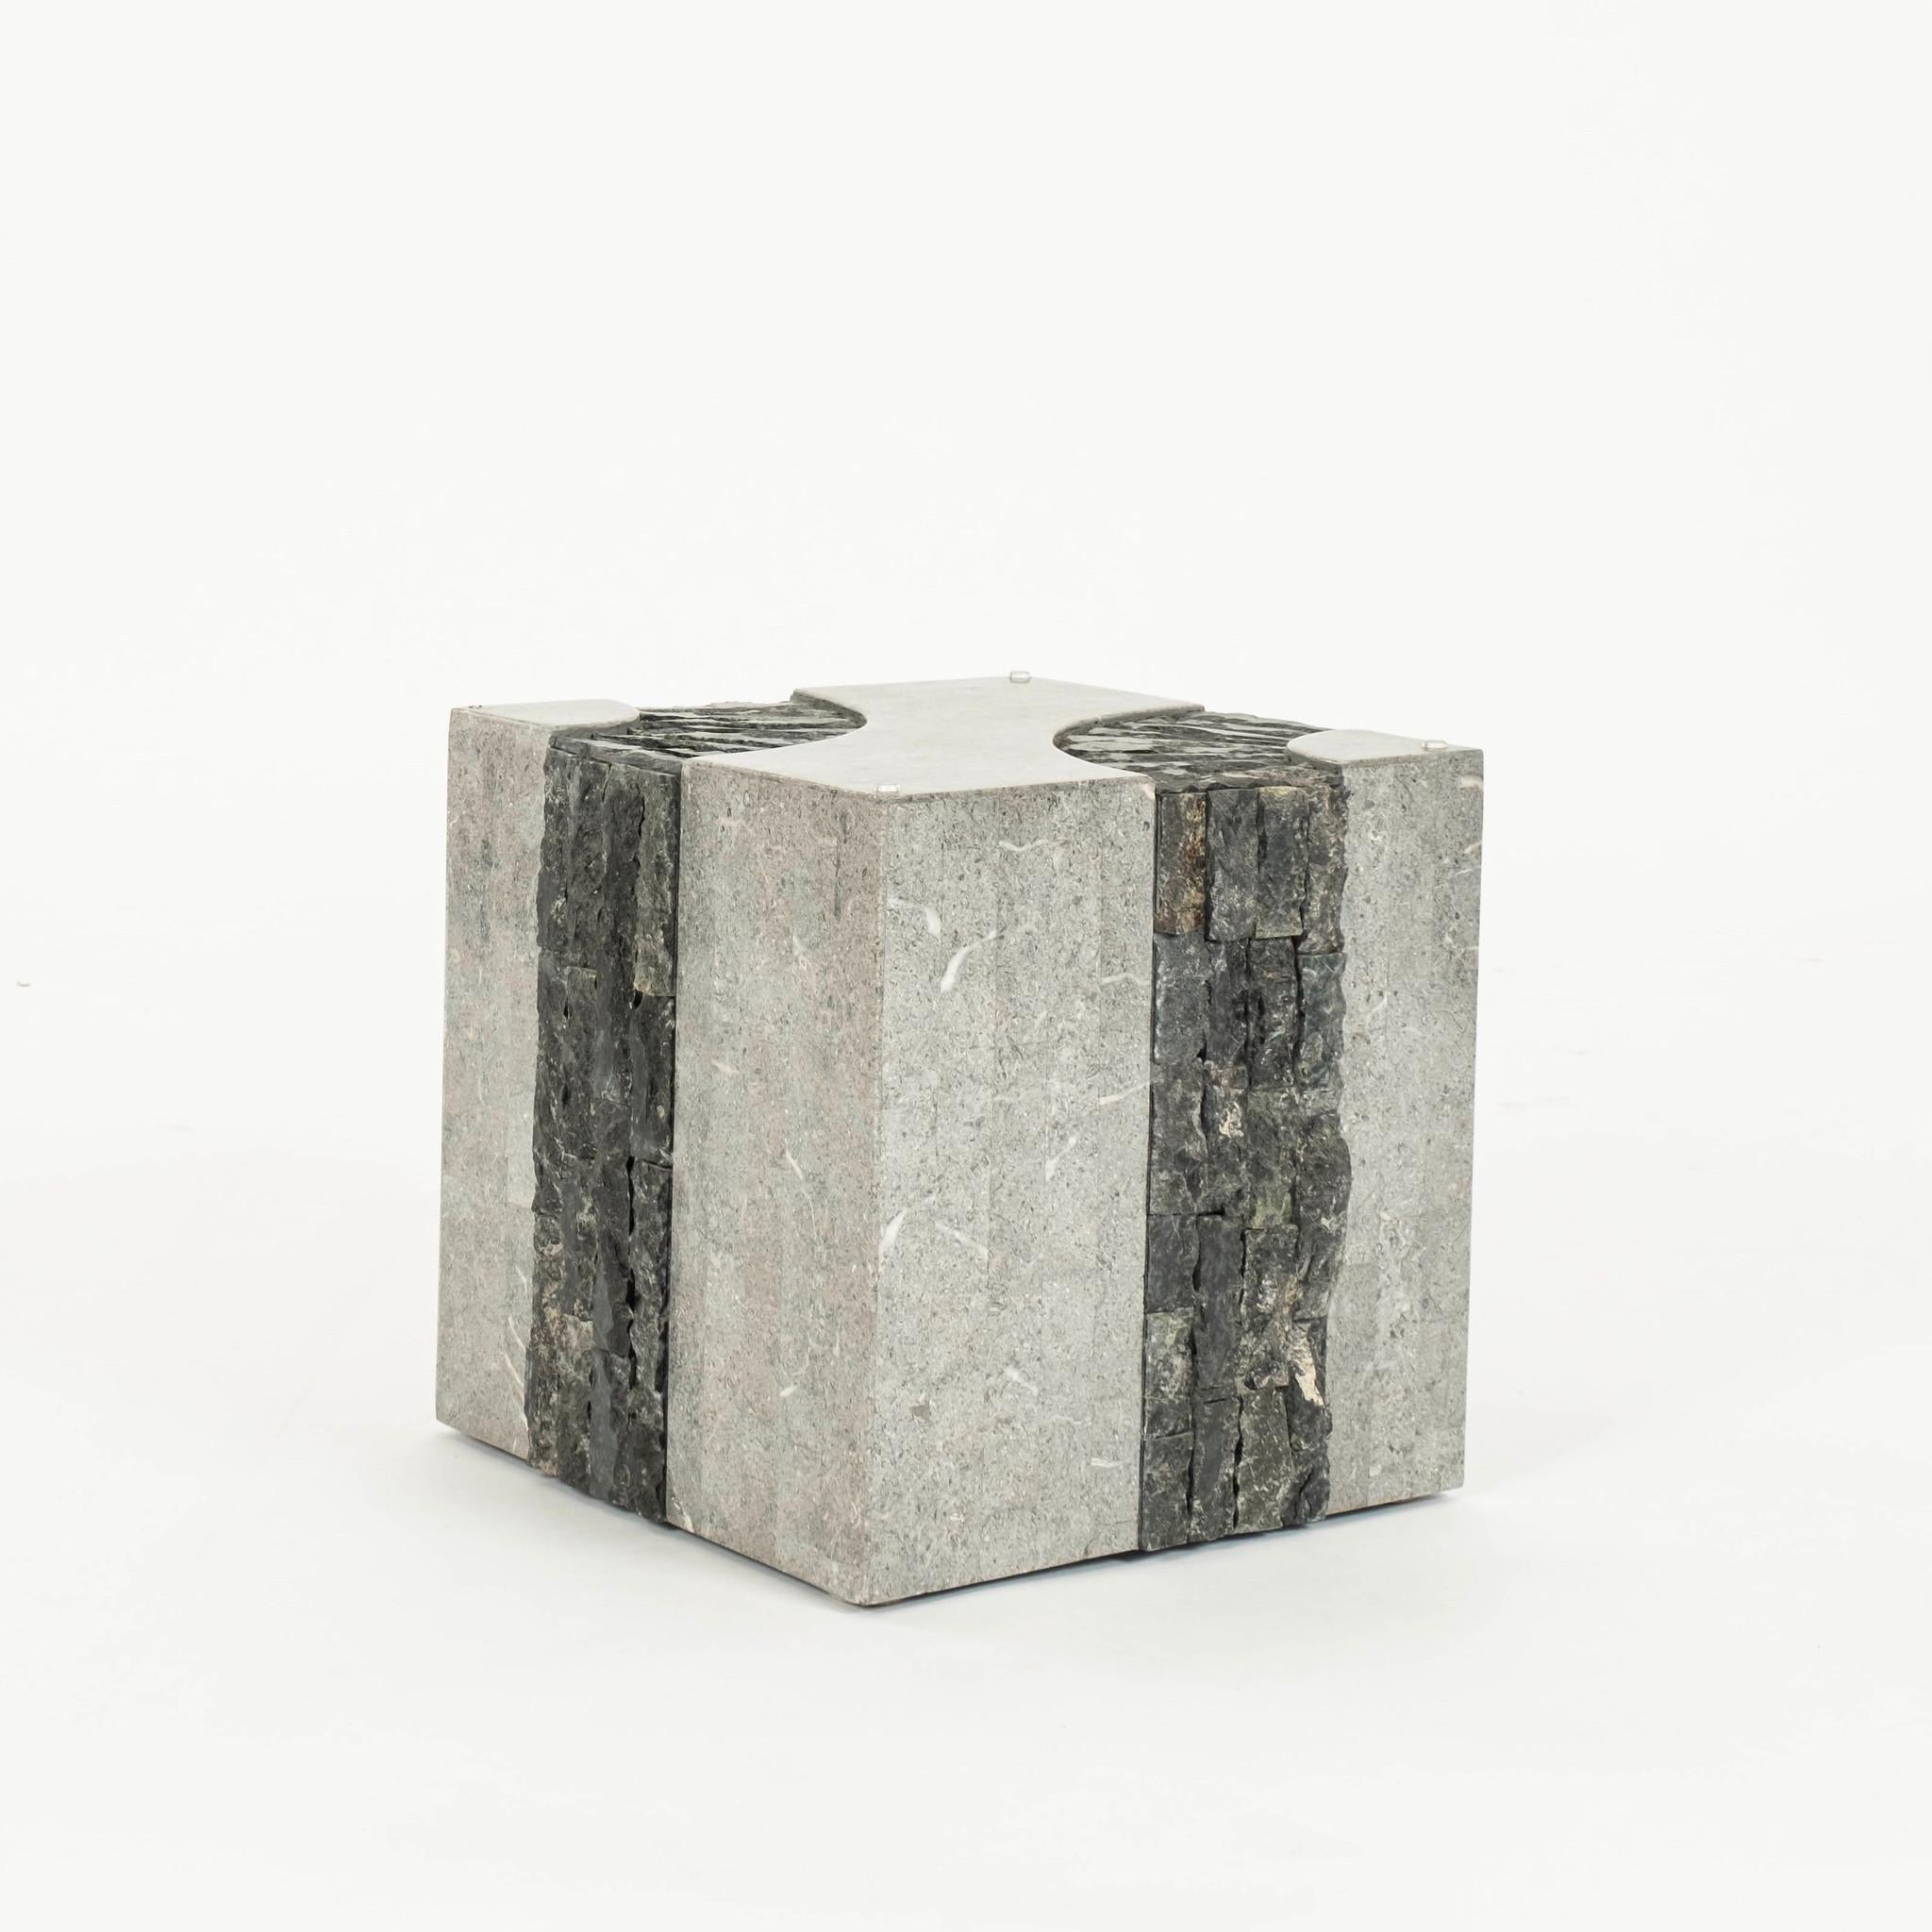 Laminated Tessellated Black White Gray Stone Cube Occasional Table For Sale